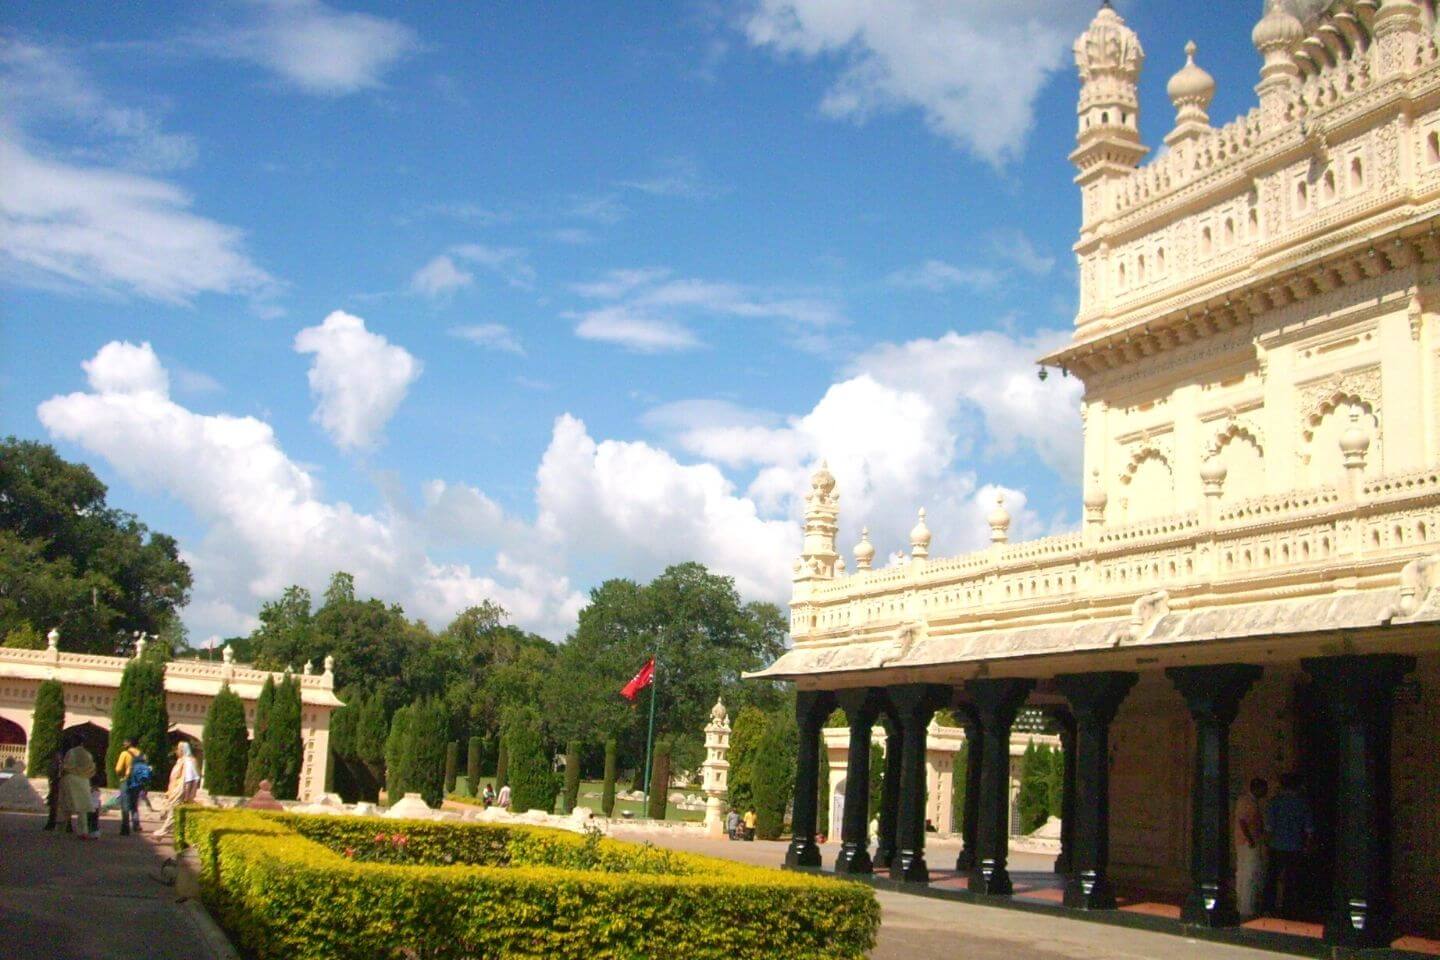 Srirangapatna is another top Heritage and Historical places to visit near Bangalore under 200 km